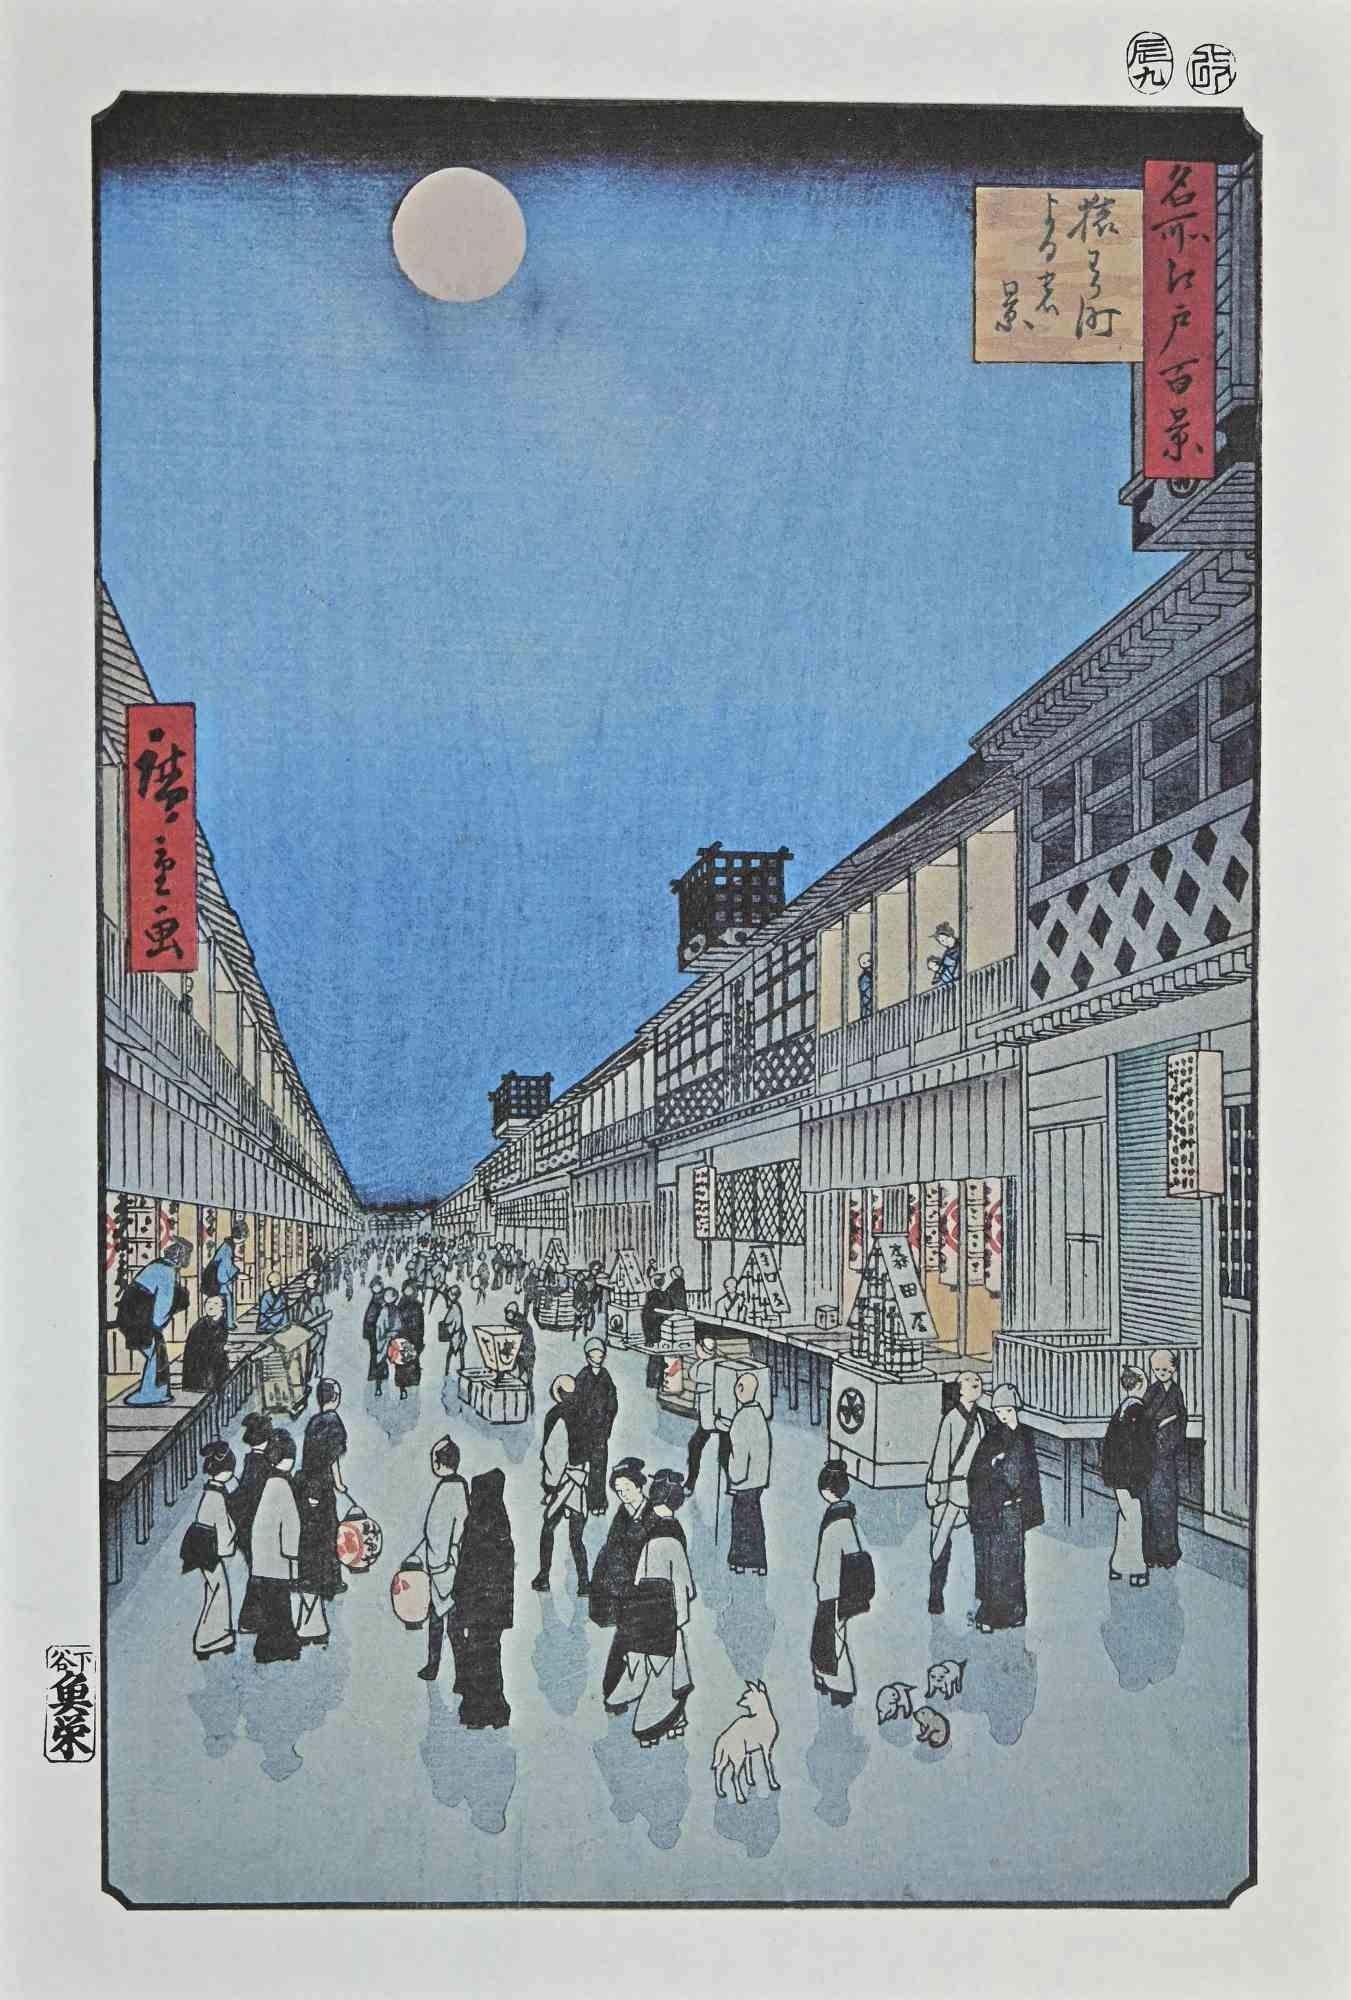 hiroshige trained as a woodblock print artist while he was working in what job